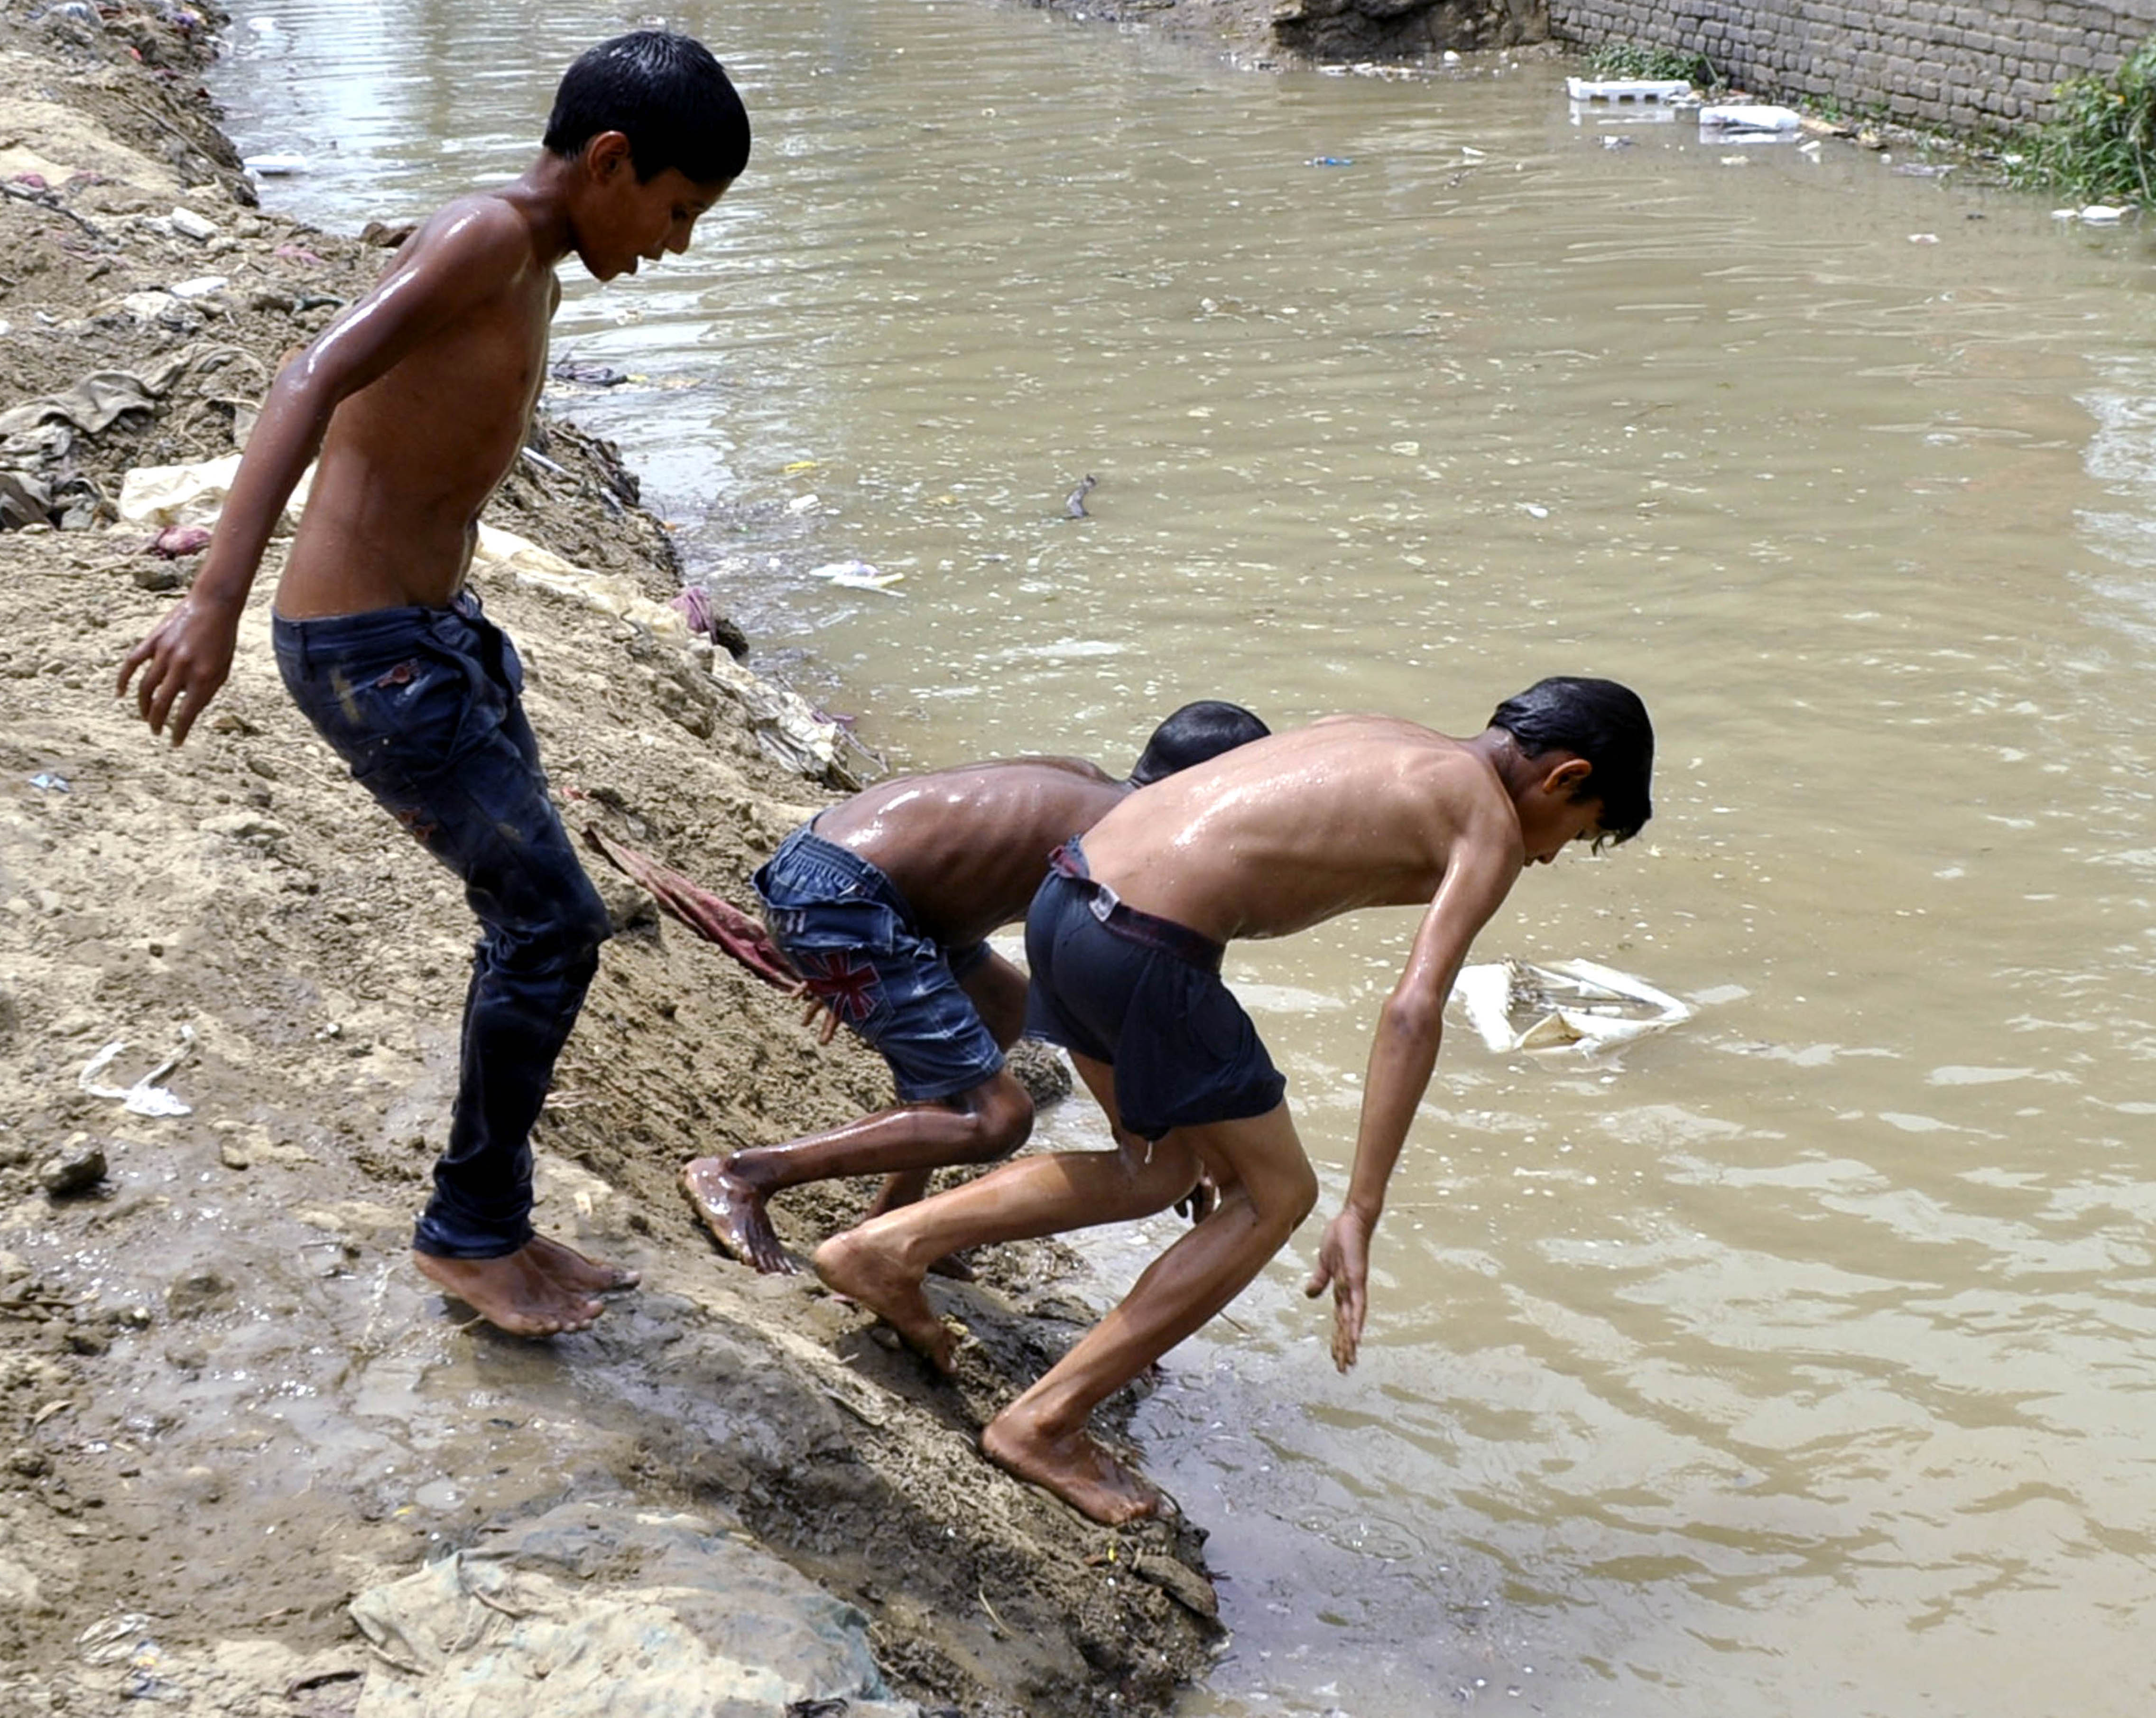 Patiala: Despite ban, youths continue to swim in canals